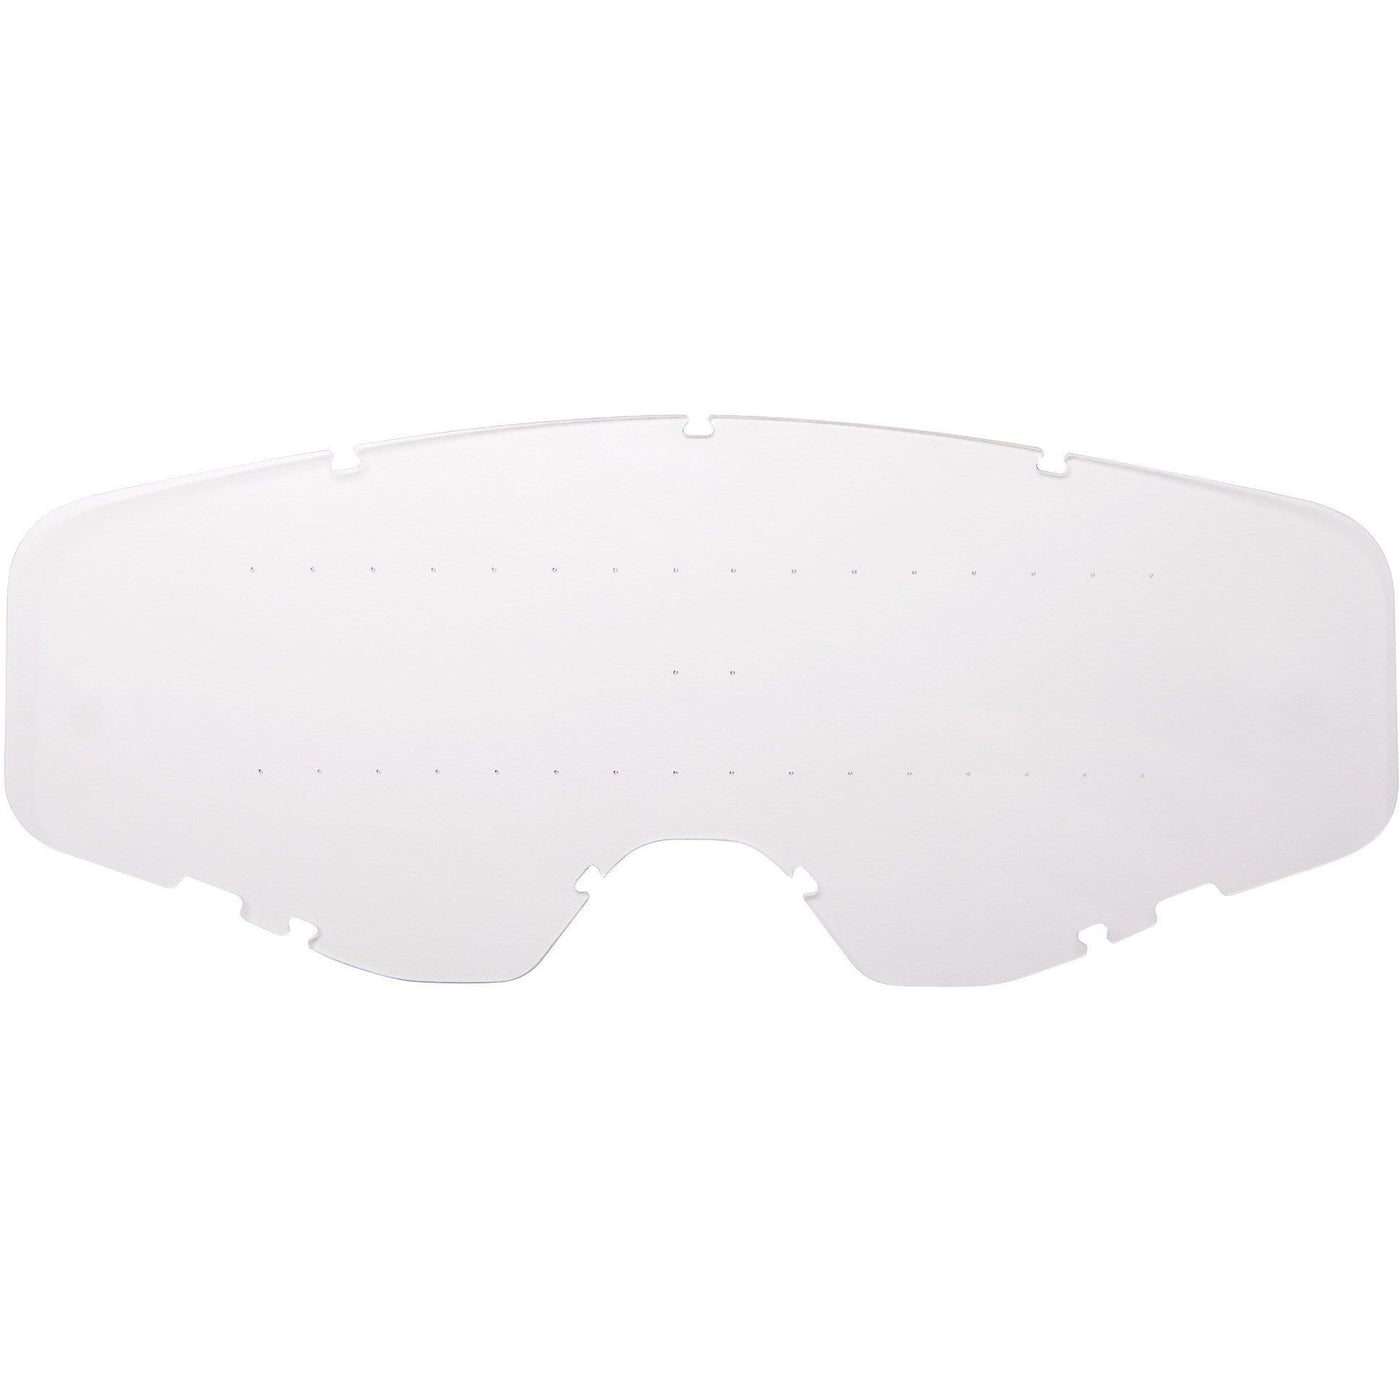 SPY FOUNDATION Replacement Lens